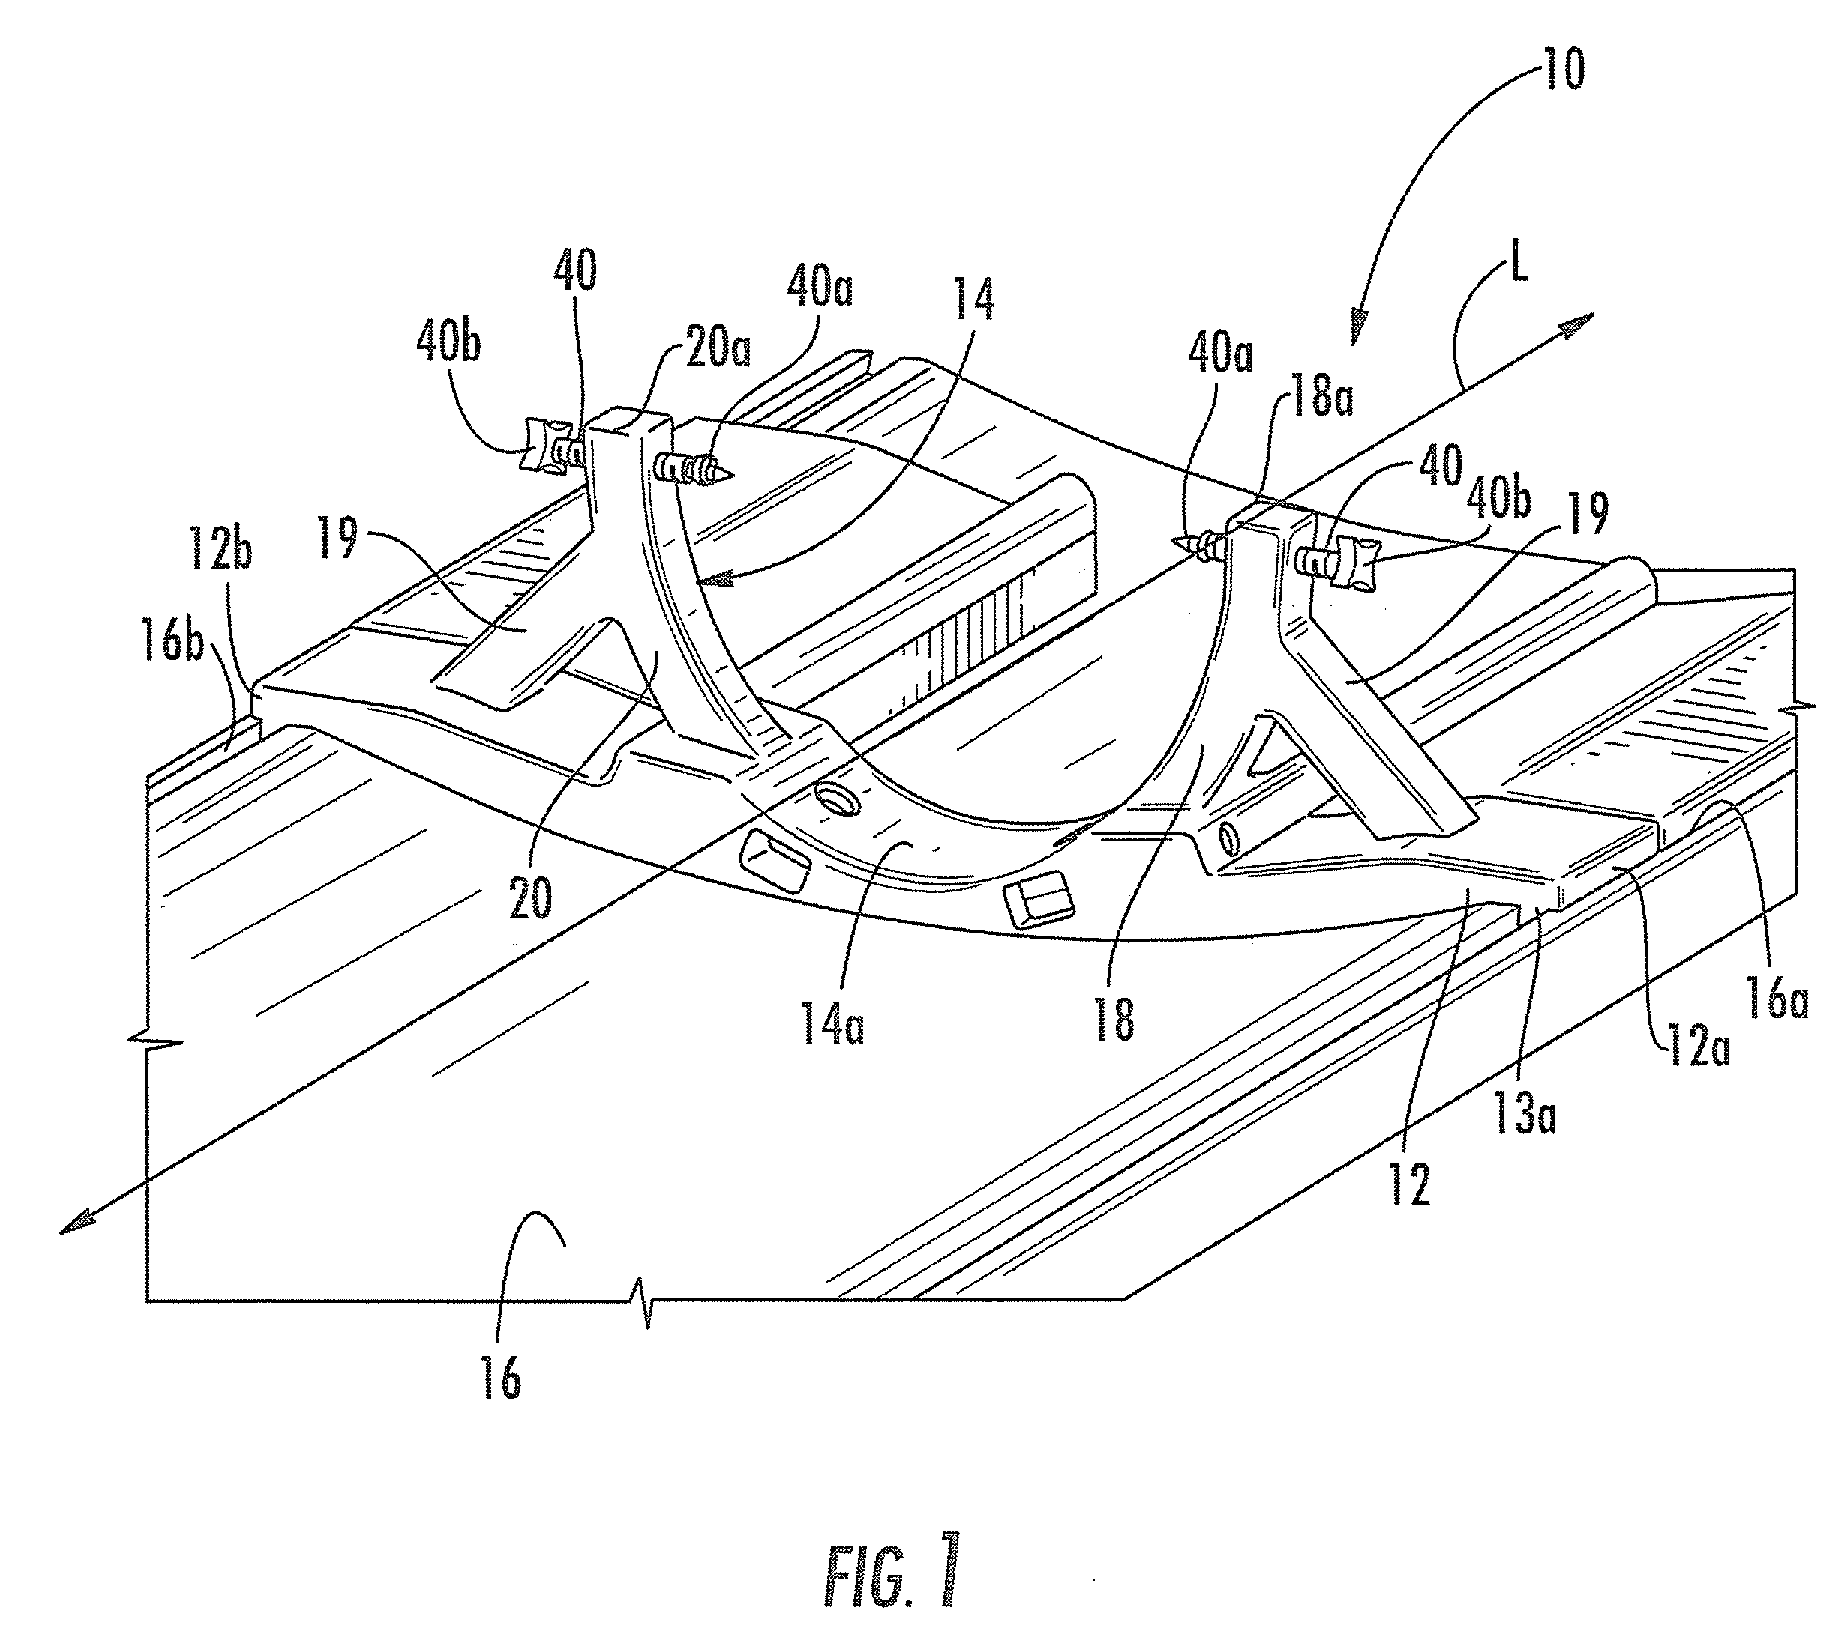 Mri-compatible head fixation frame with cooperating head coil apparatus